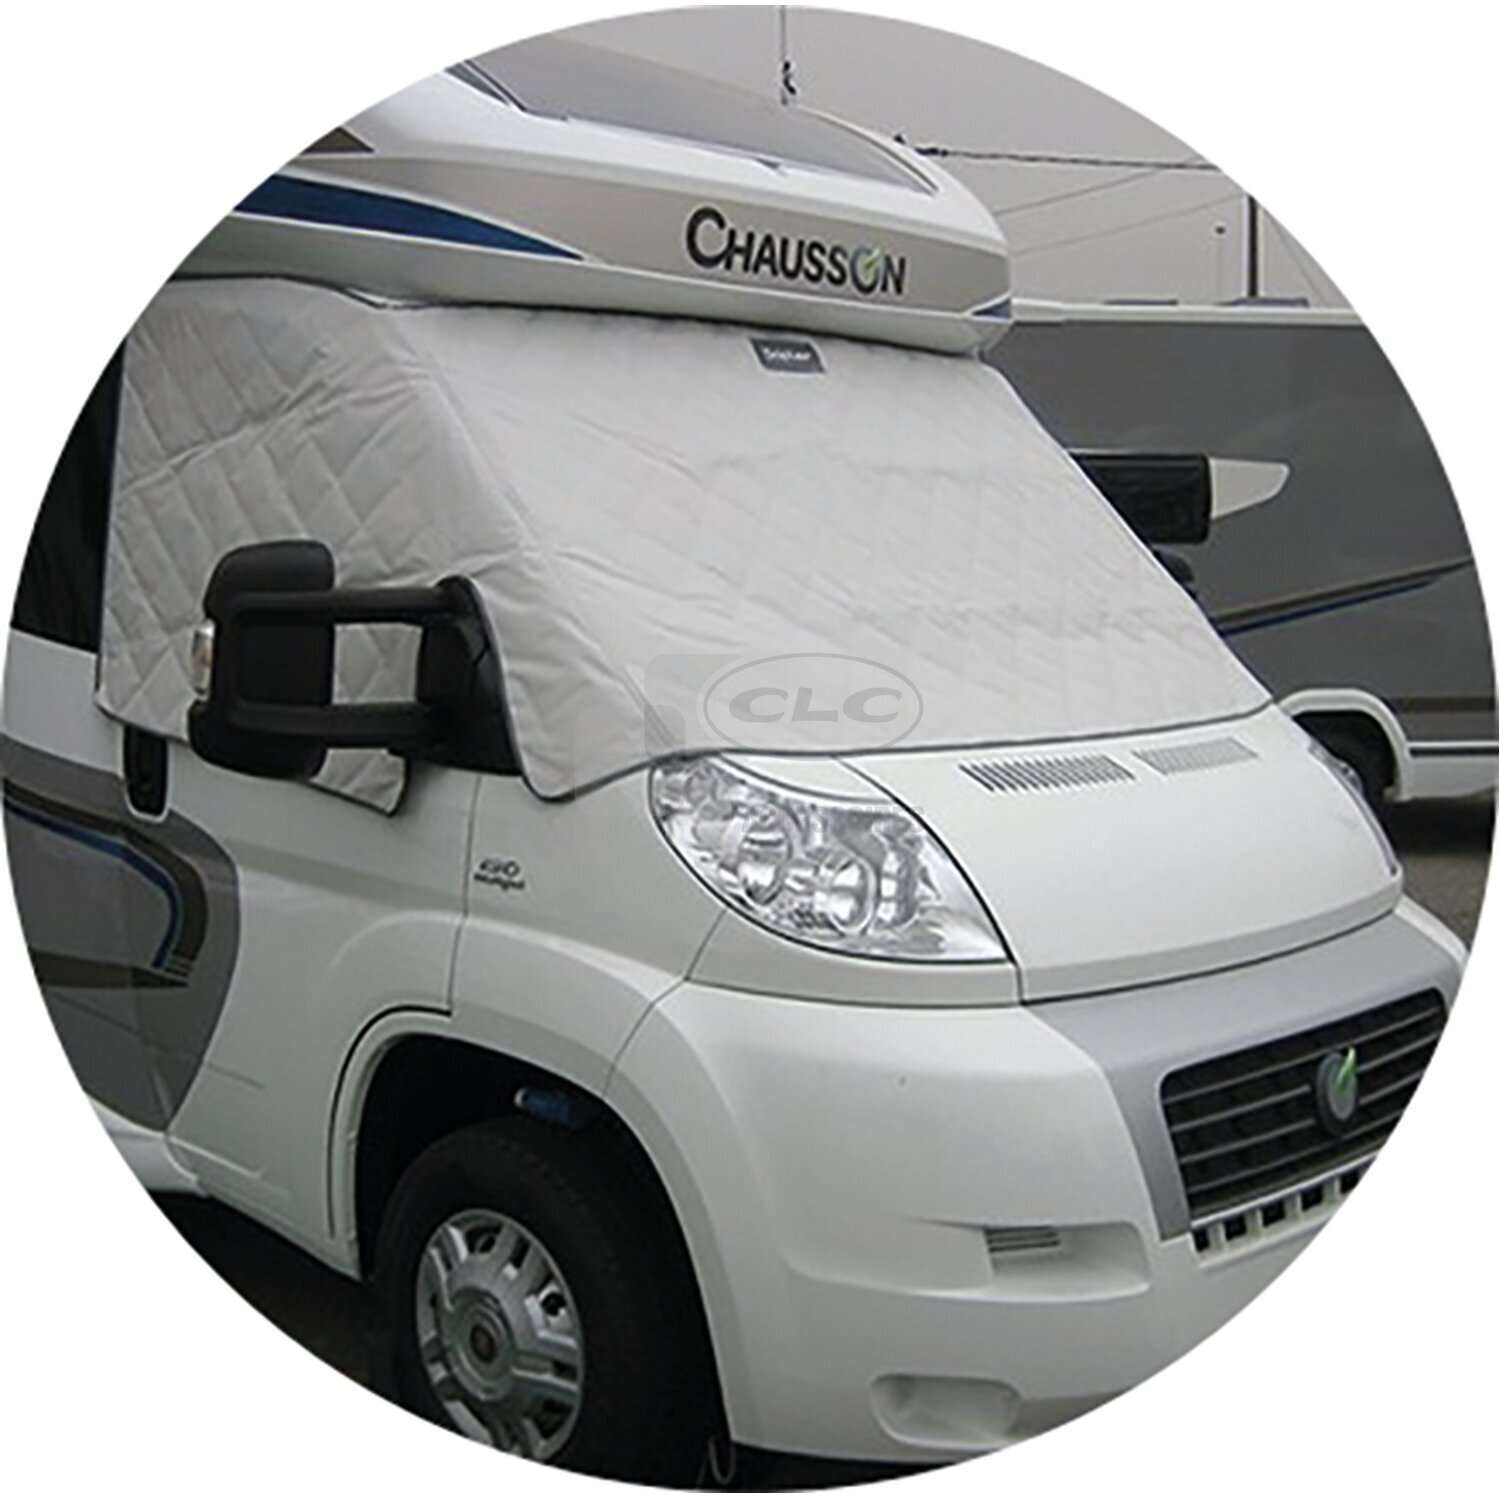 Soplair Protection Isotherme Thermocover Protection Isotherme  Boxer/Jumper/Ducato X230/244 - de 1994 à 2006